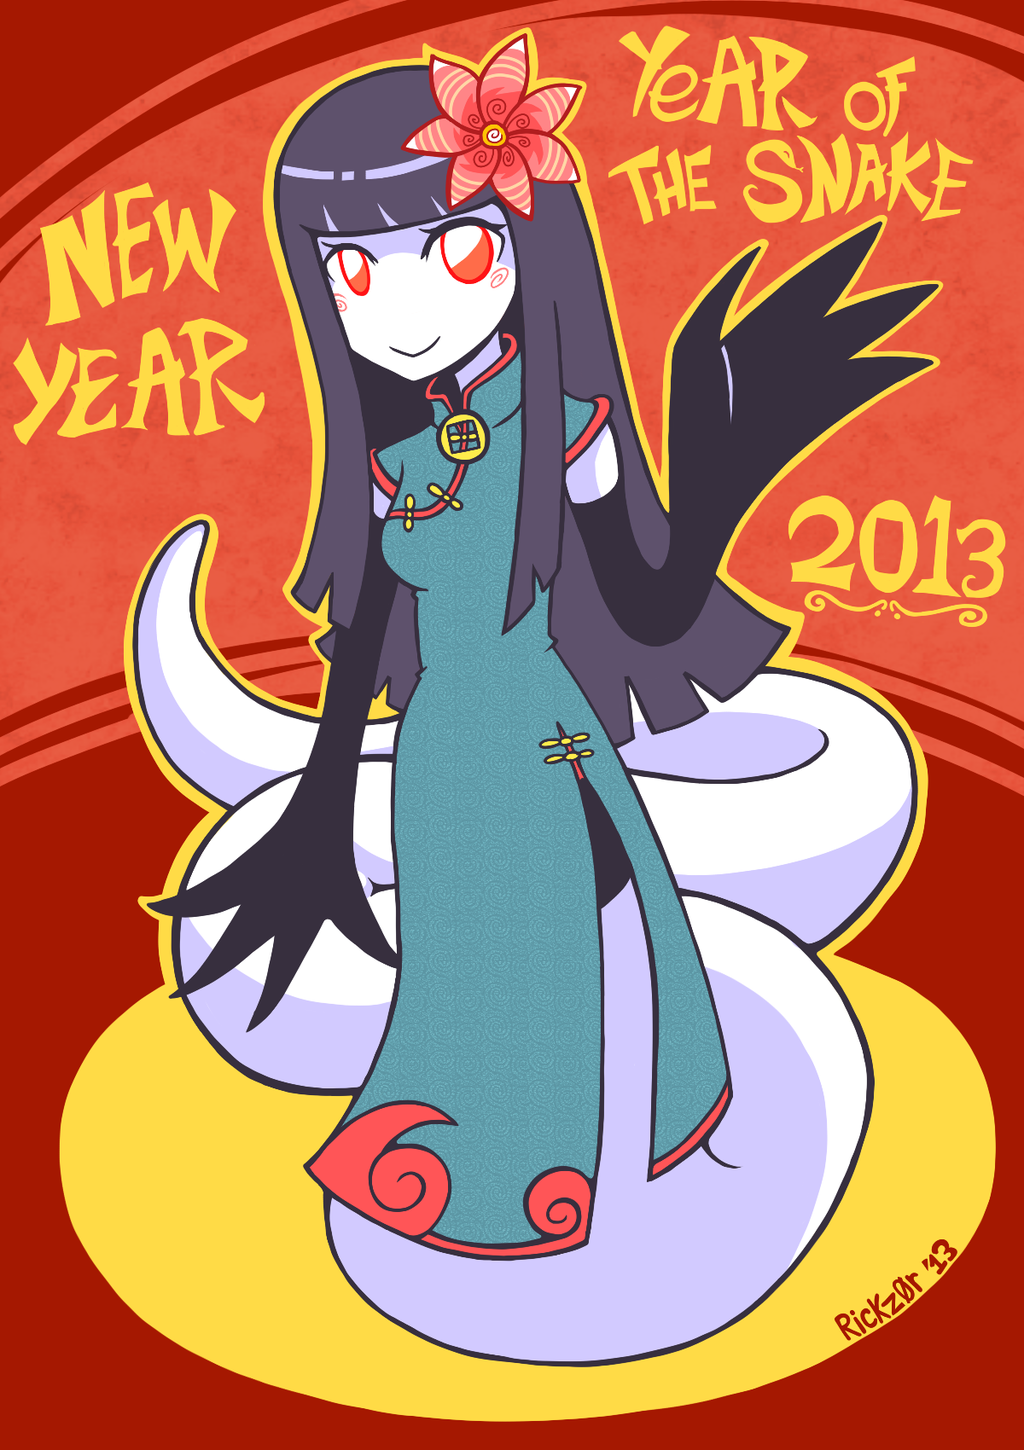 Lunar New Year 2013 - Year of the Snake